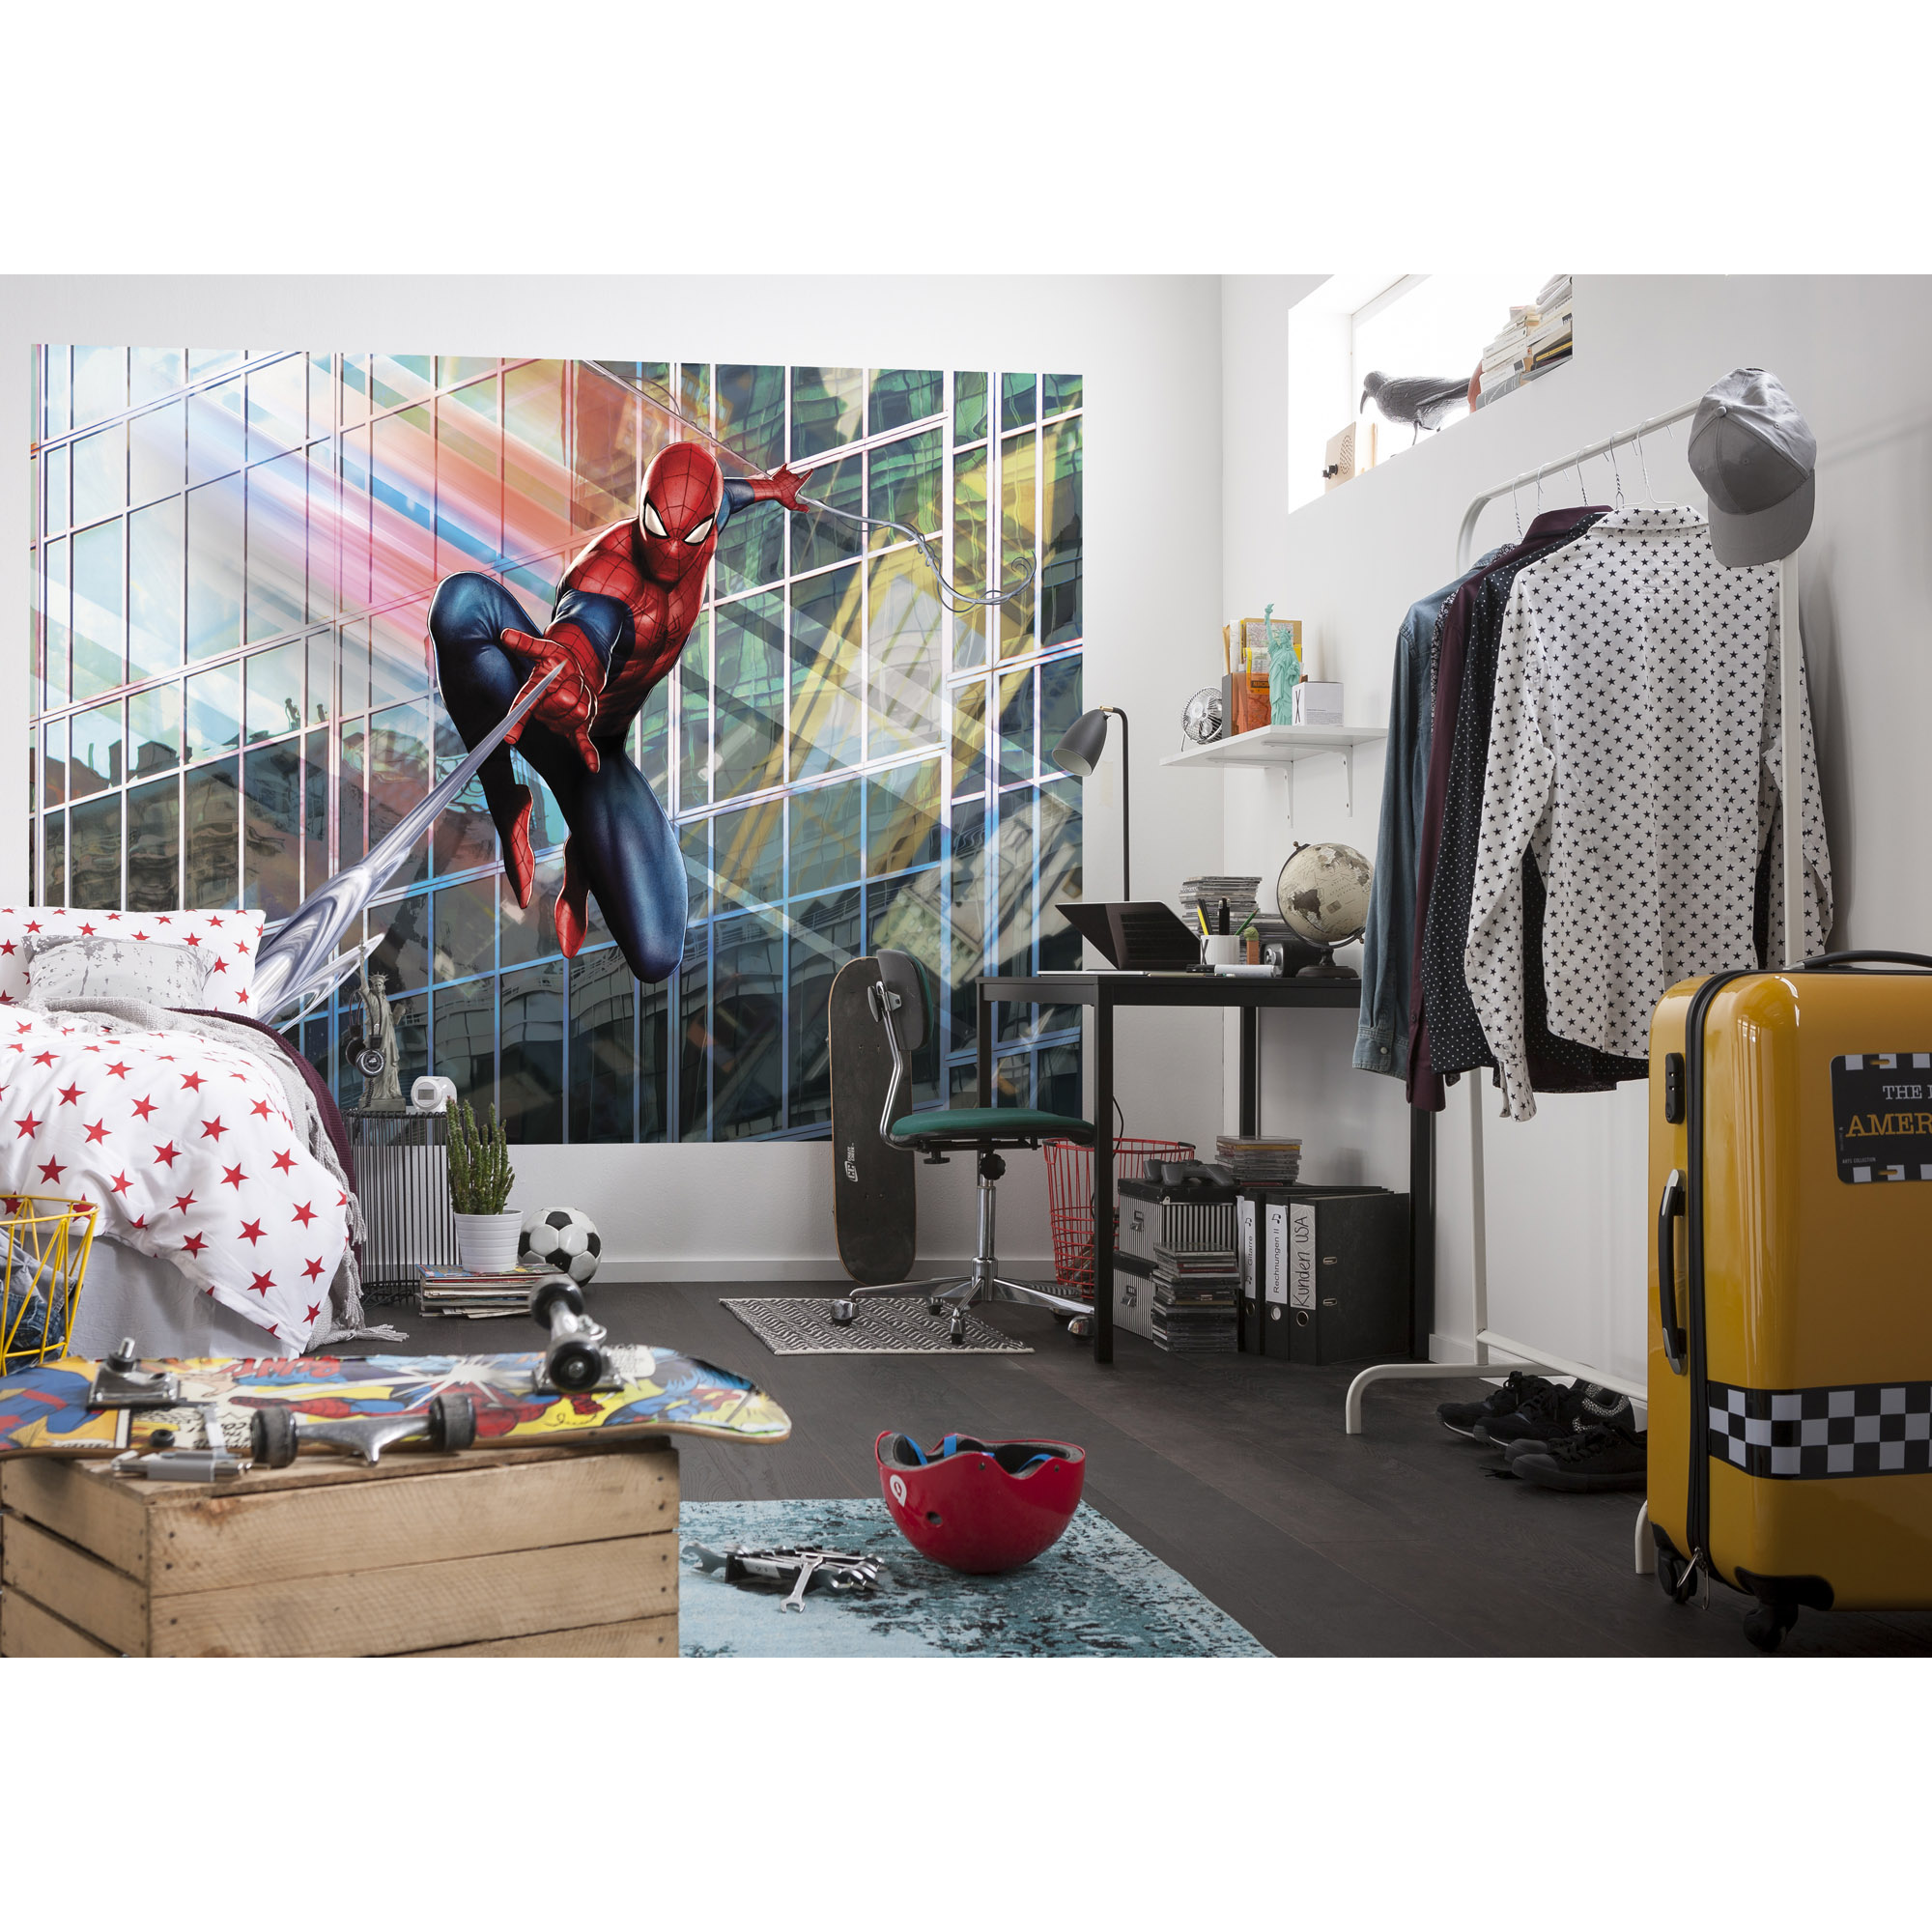 Fototapete 'Spider-Man Rush Hour' 184 x 254 cm + product picture